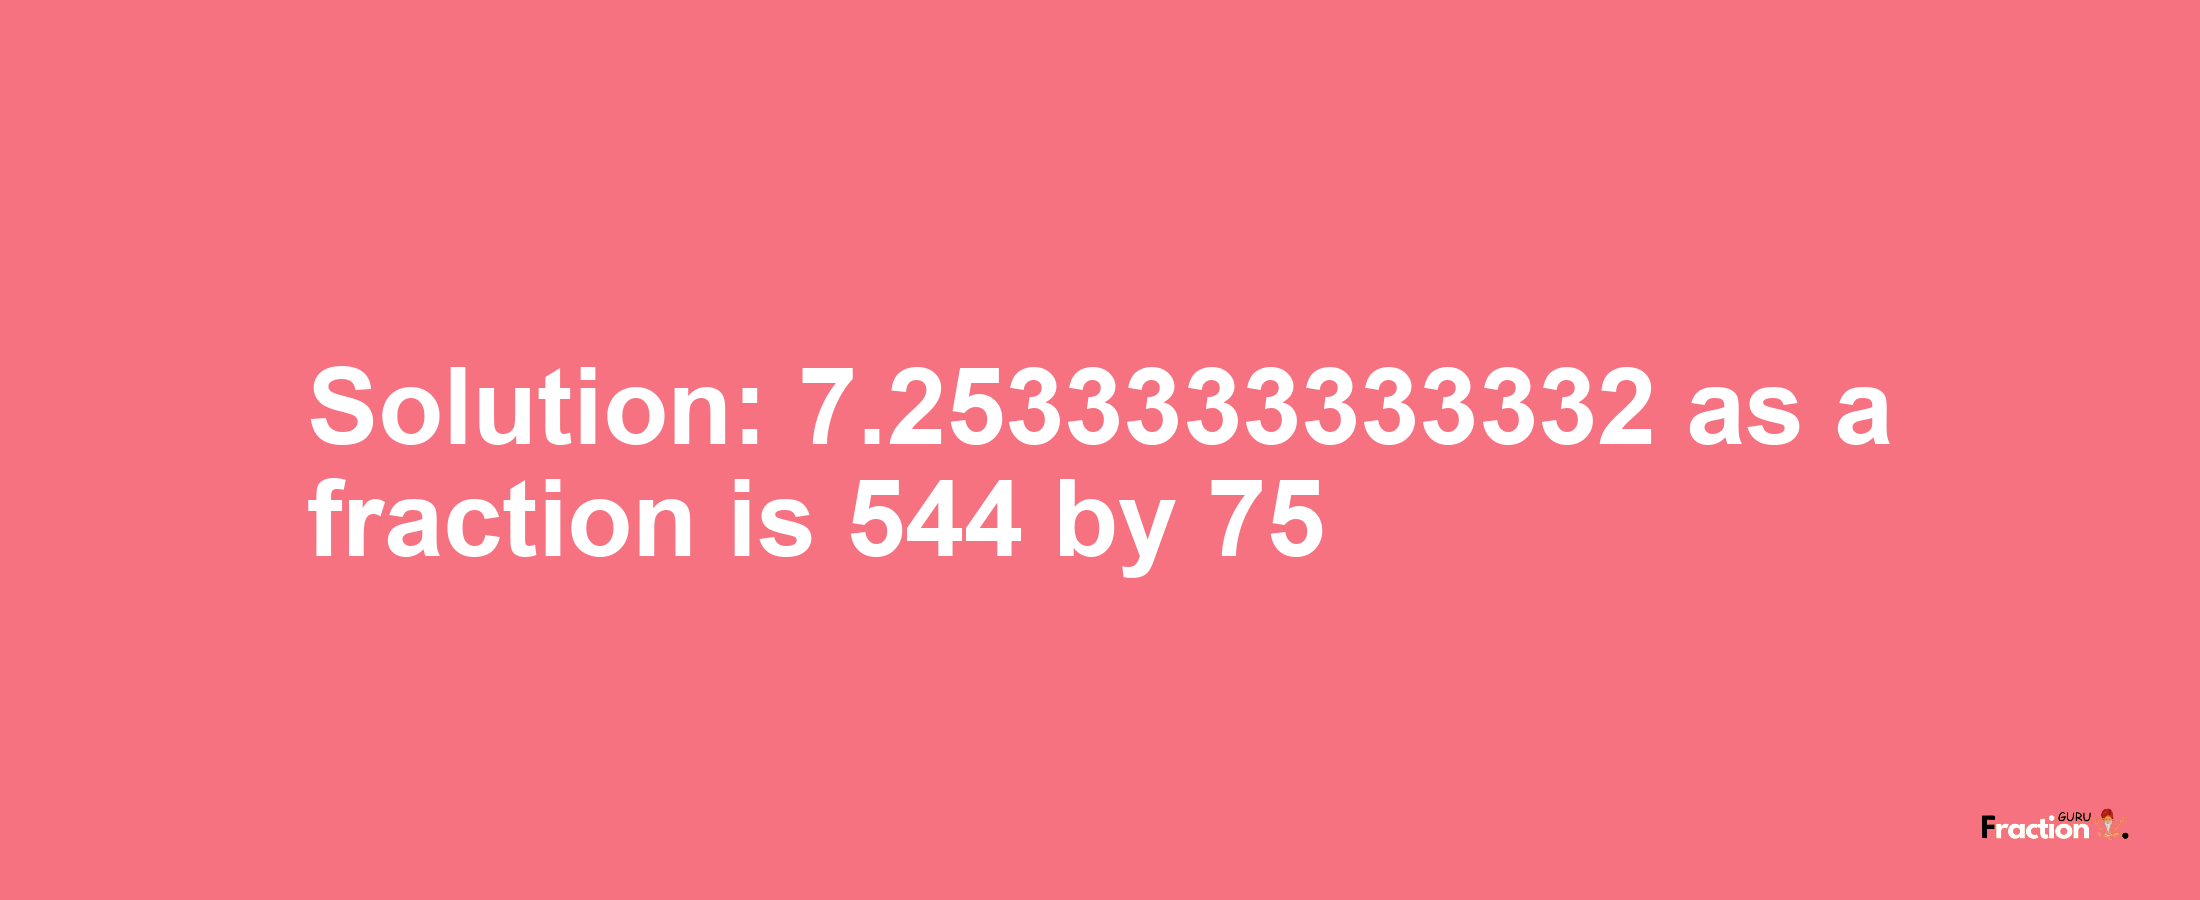 Solution:7.2533333333332 as a fraction is 544/75